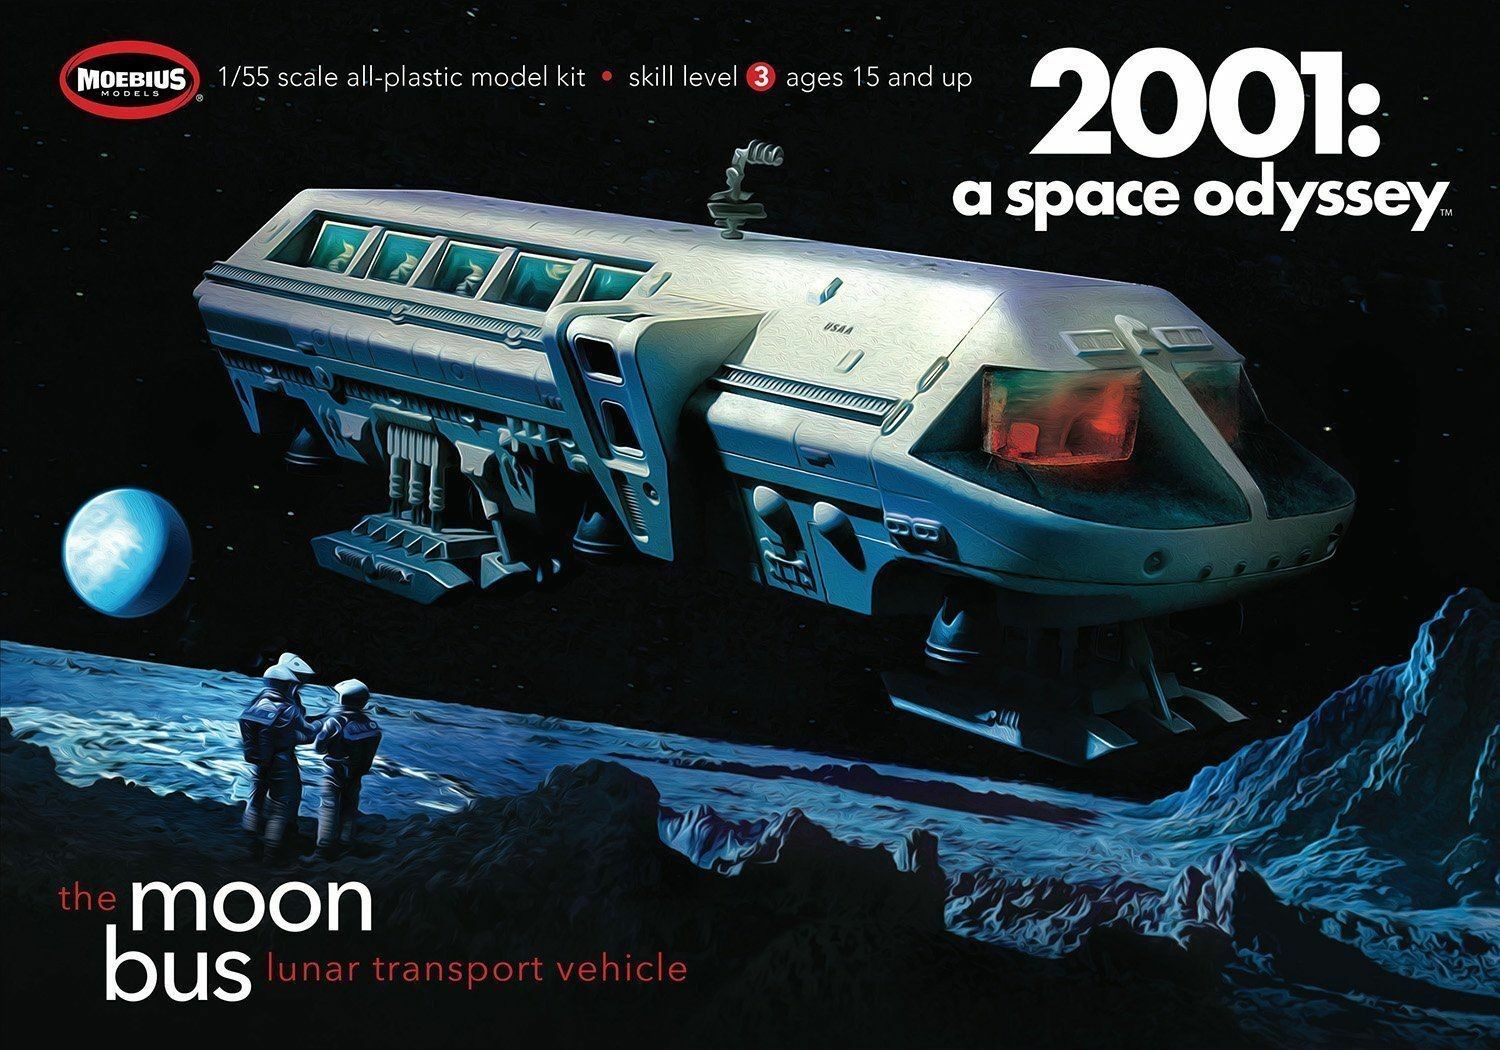 Moebius 2001-1 A Space Odyssey The moon bus 1:55